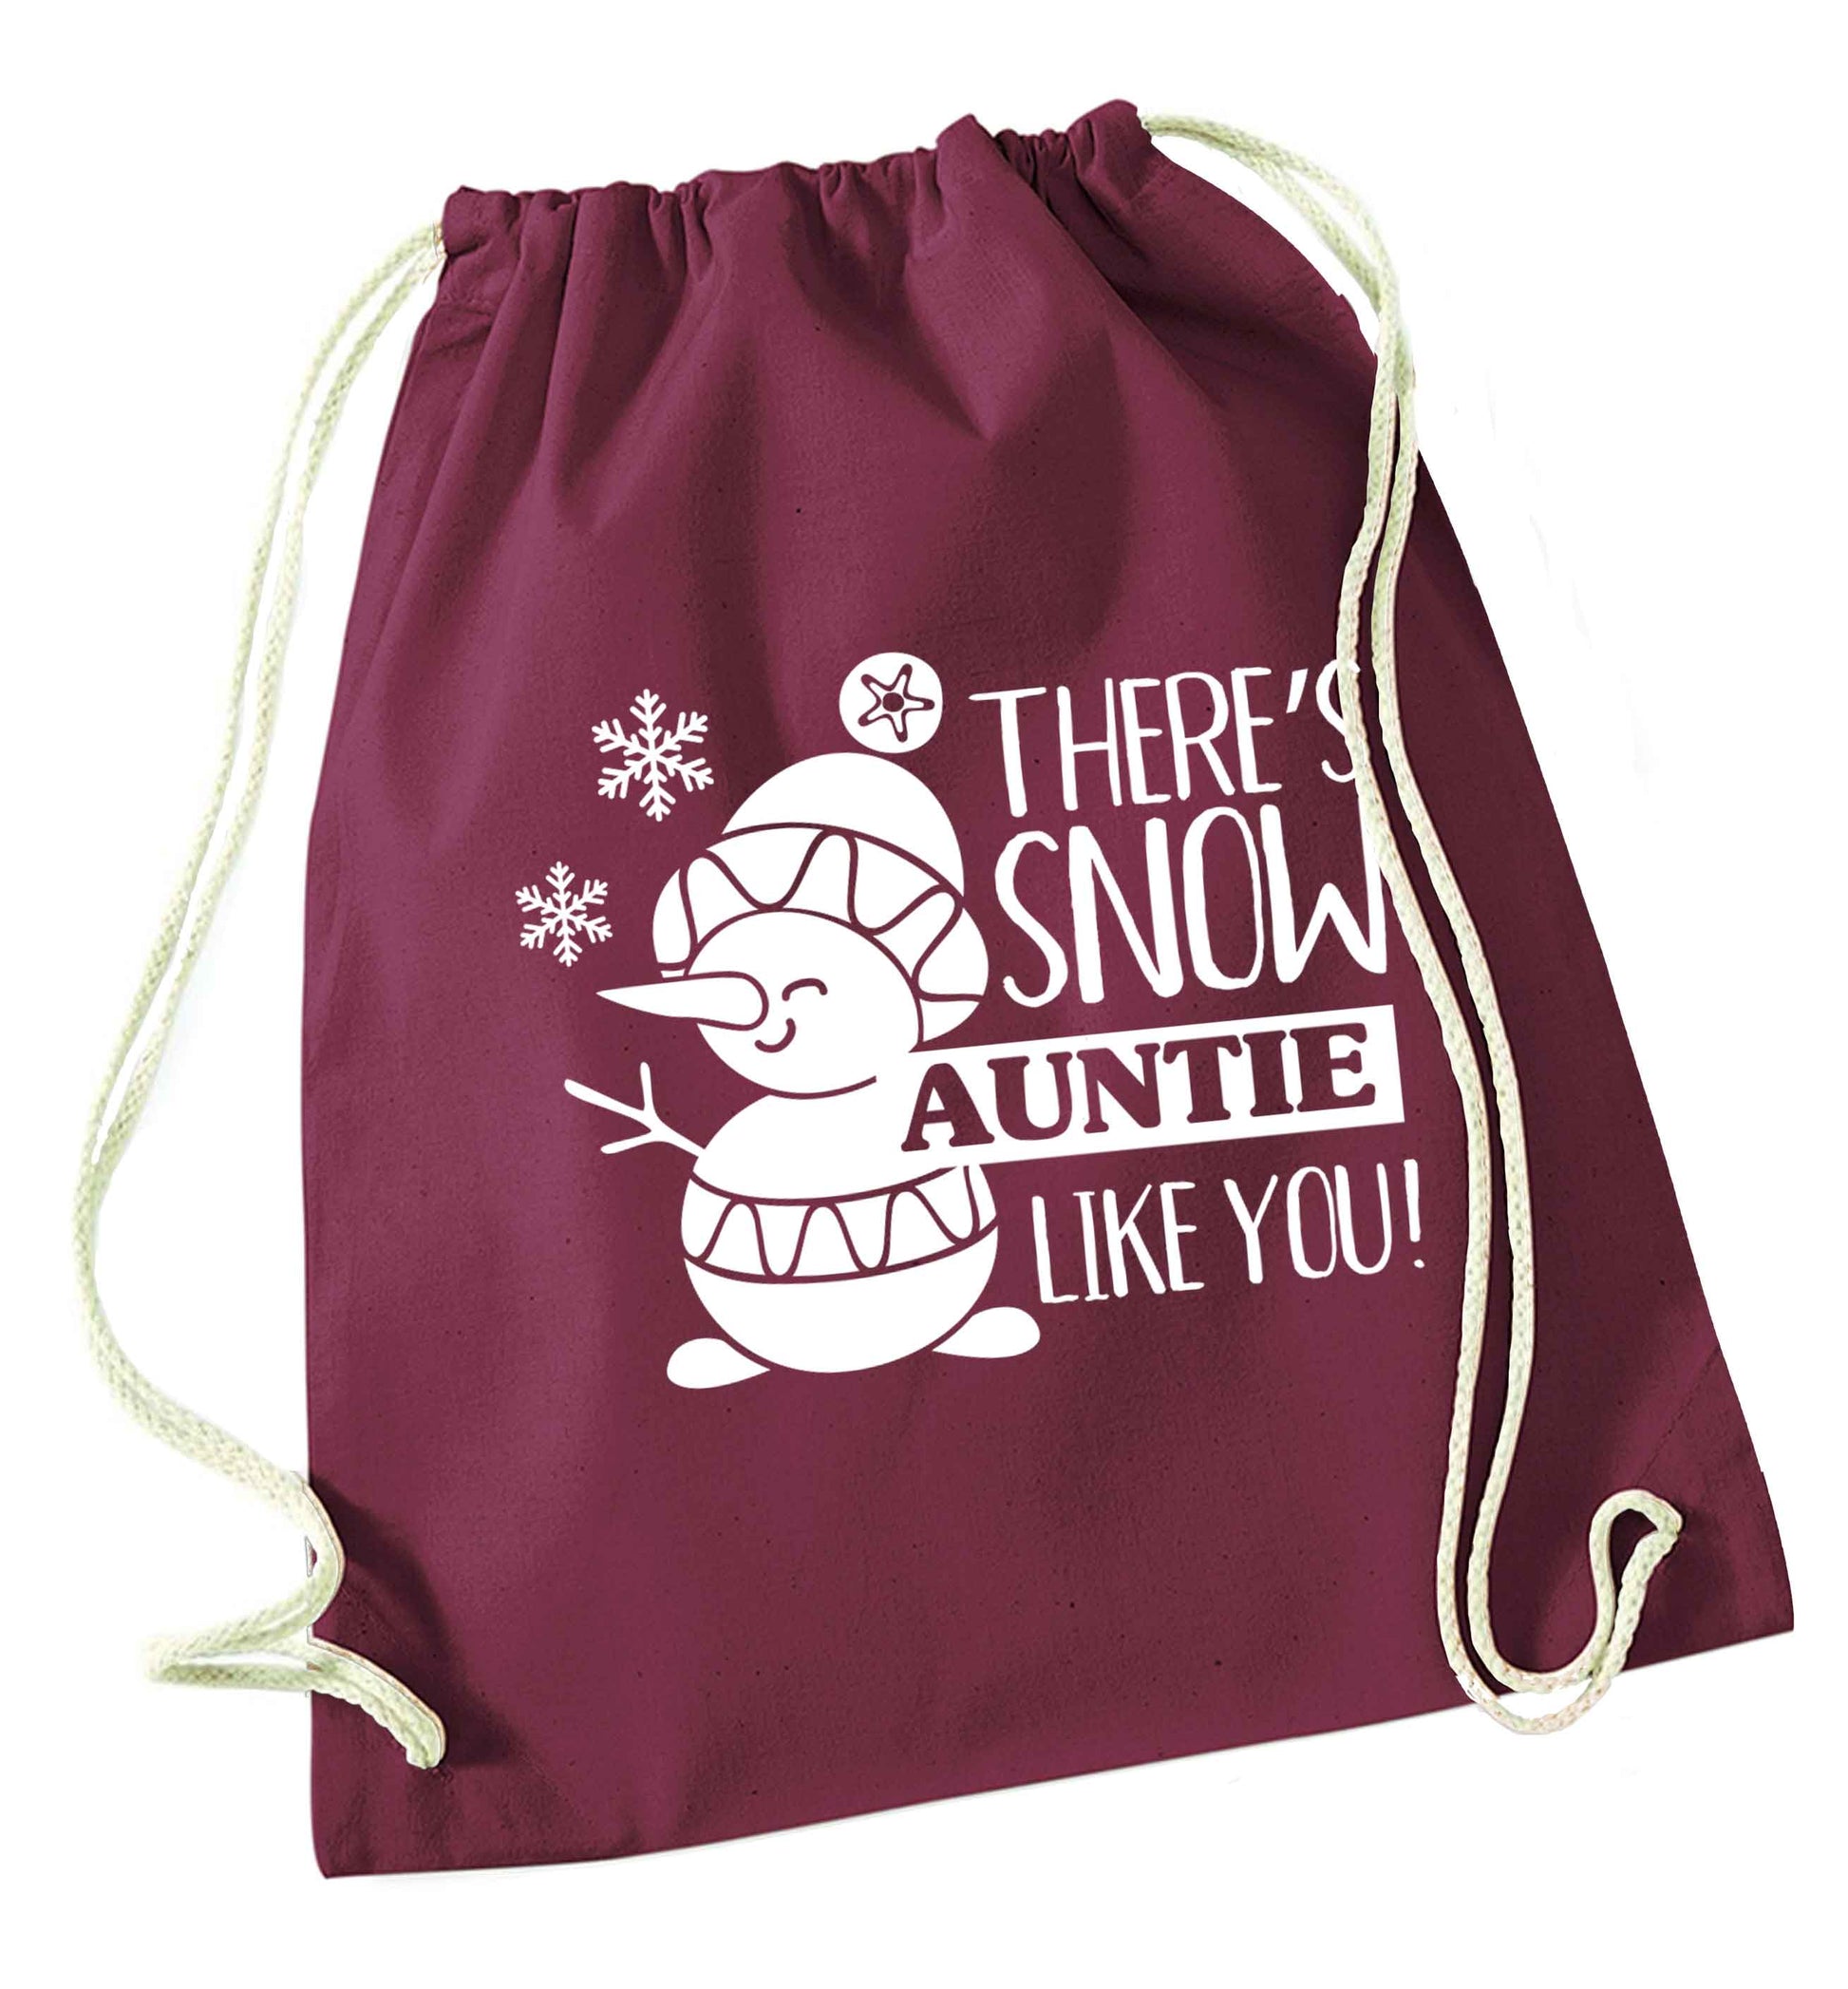 There's snow auntie like you maroon drawstring bag